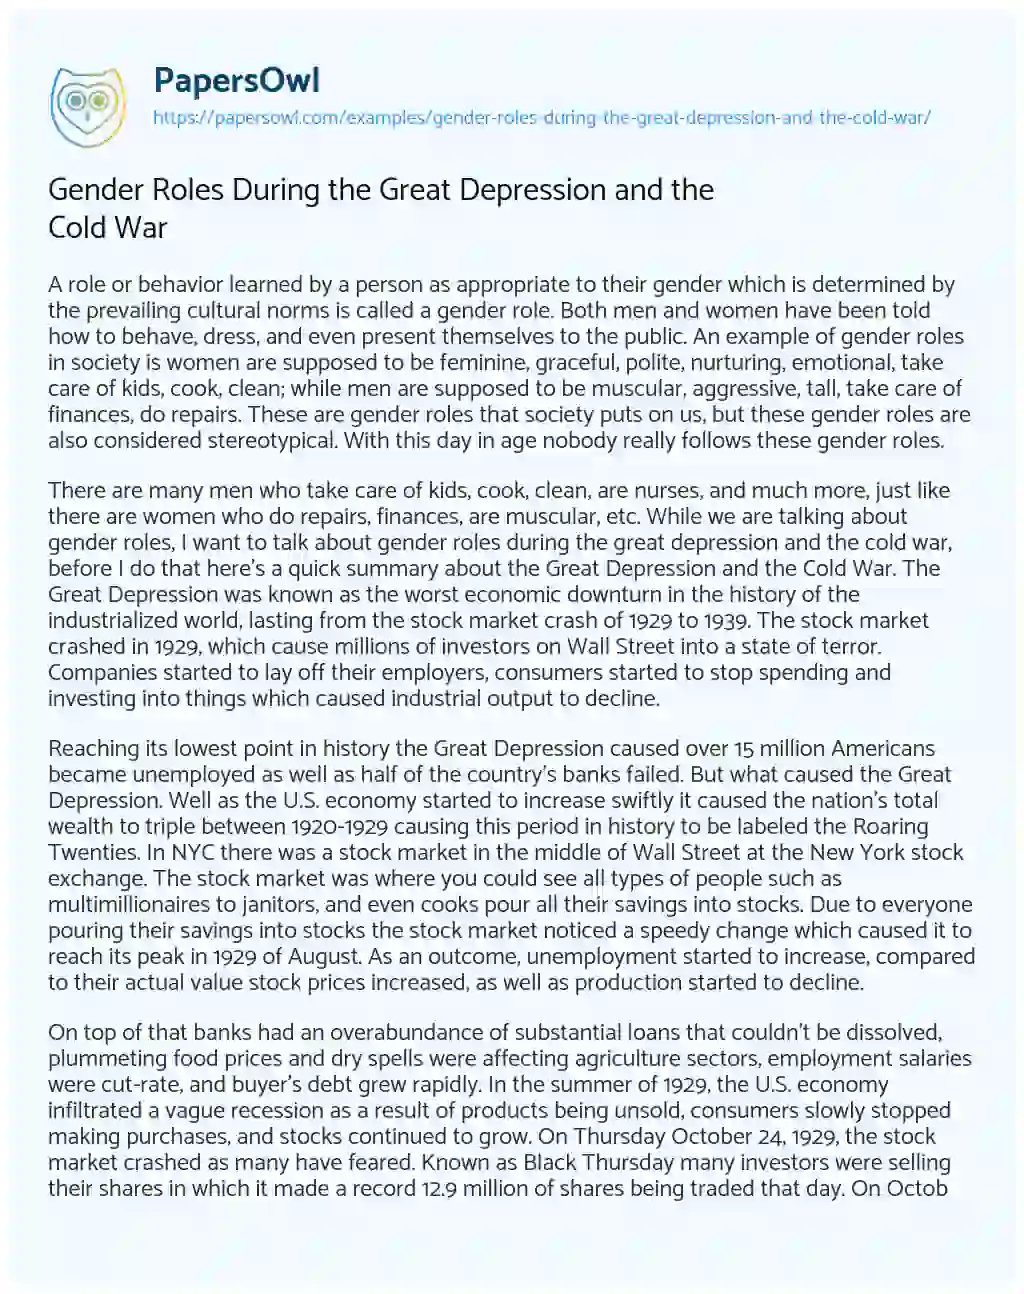 Essay on Gender Roles during the Great Depression and the Cold War